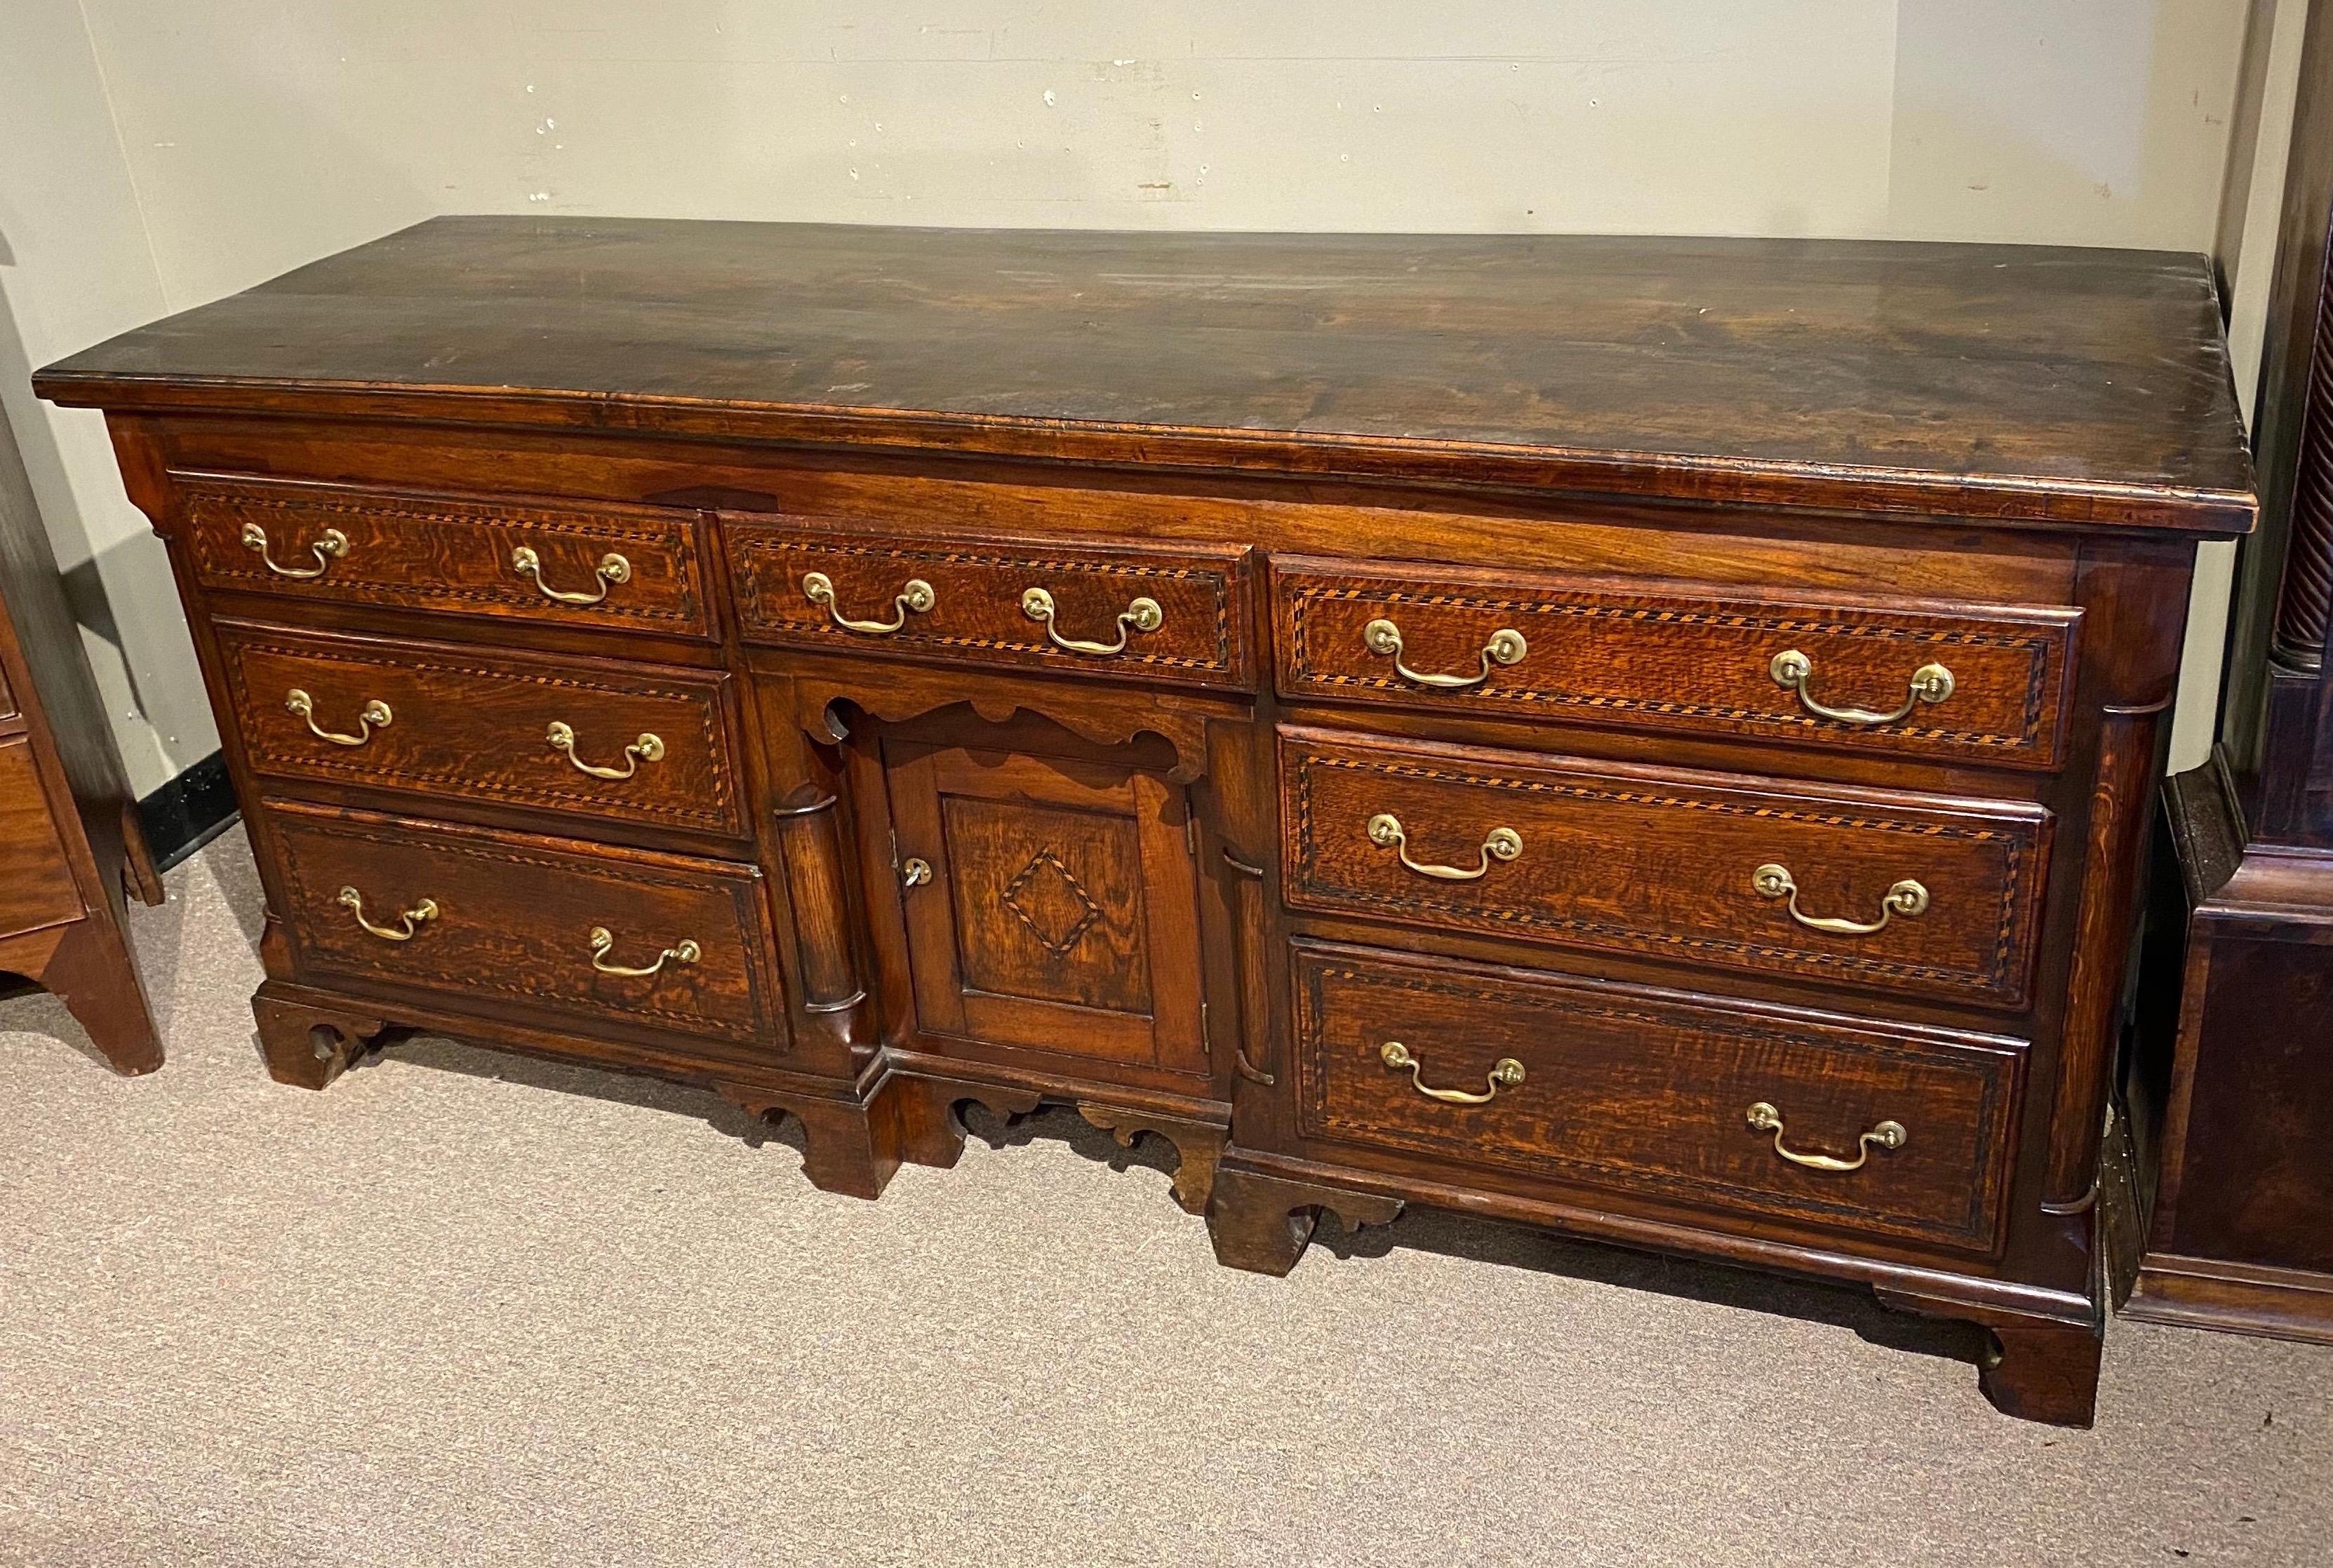 19th century English walnut and oak dresser base on bracket feet with 7 drawers and open cabinet space behind prospect door. Drawer fronts all inlaid. Carved quarter columns. Charming piece with nice old, mellow color.